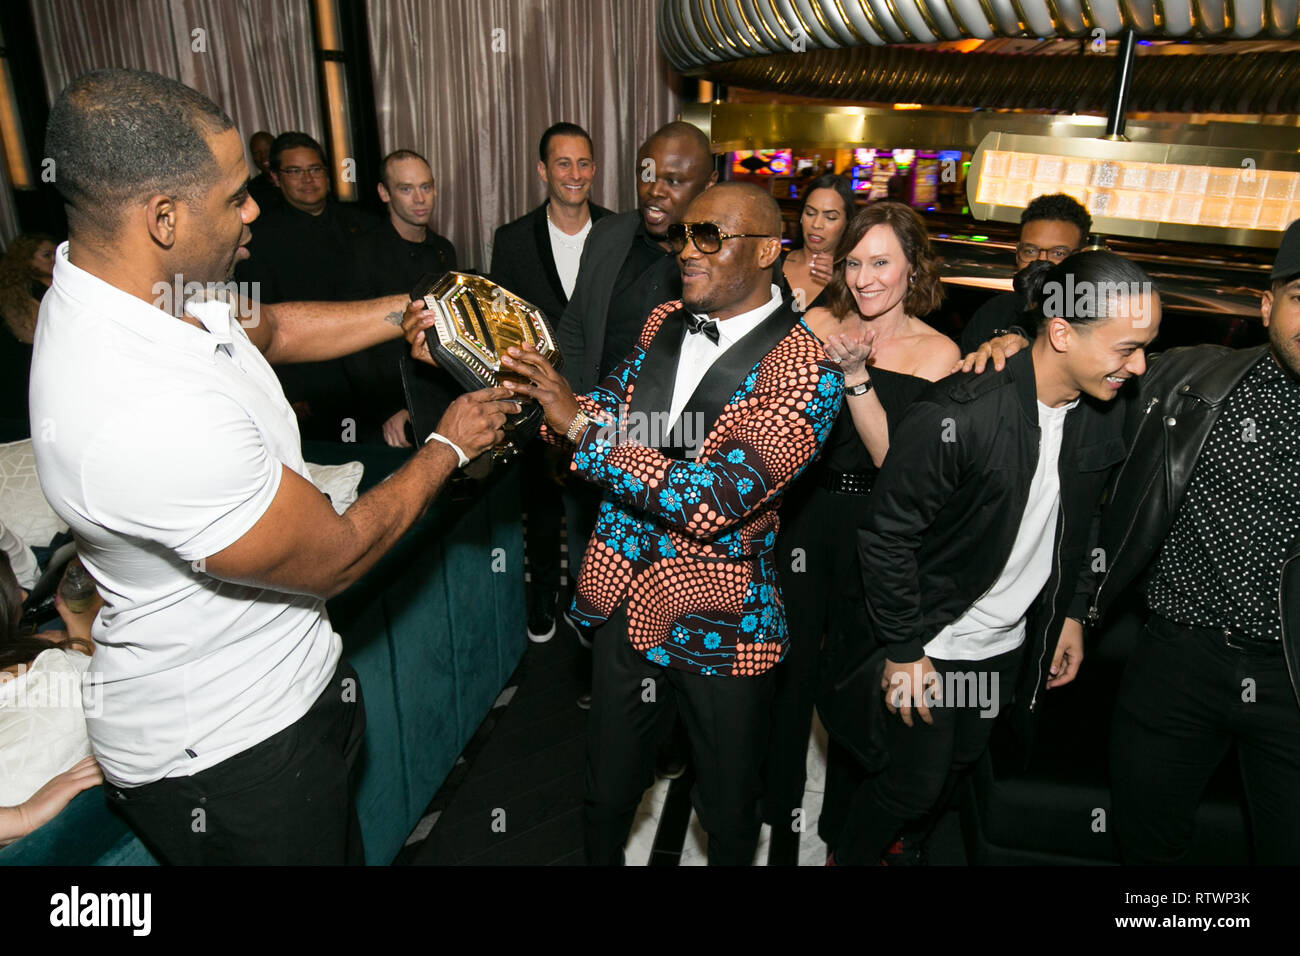 Las Vegas, NV, USA. 2nd Mar, 2019. ***HOUSE COVERAGE*** Kamaru Usman after  fight victory party at Electra Cocktail Club at Palazzo Las Vegas at The  Venetian Las Vegas in Las vegas, NV